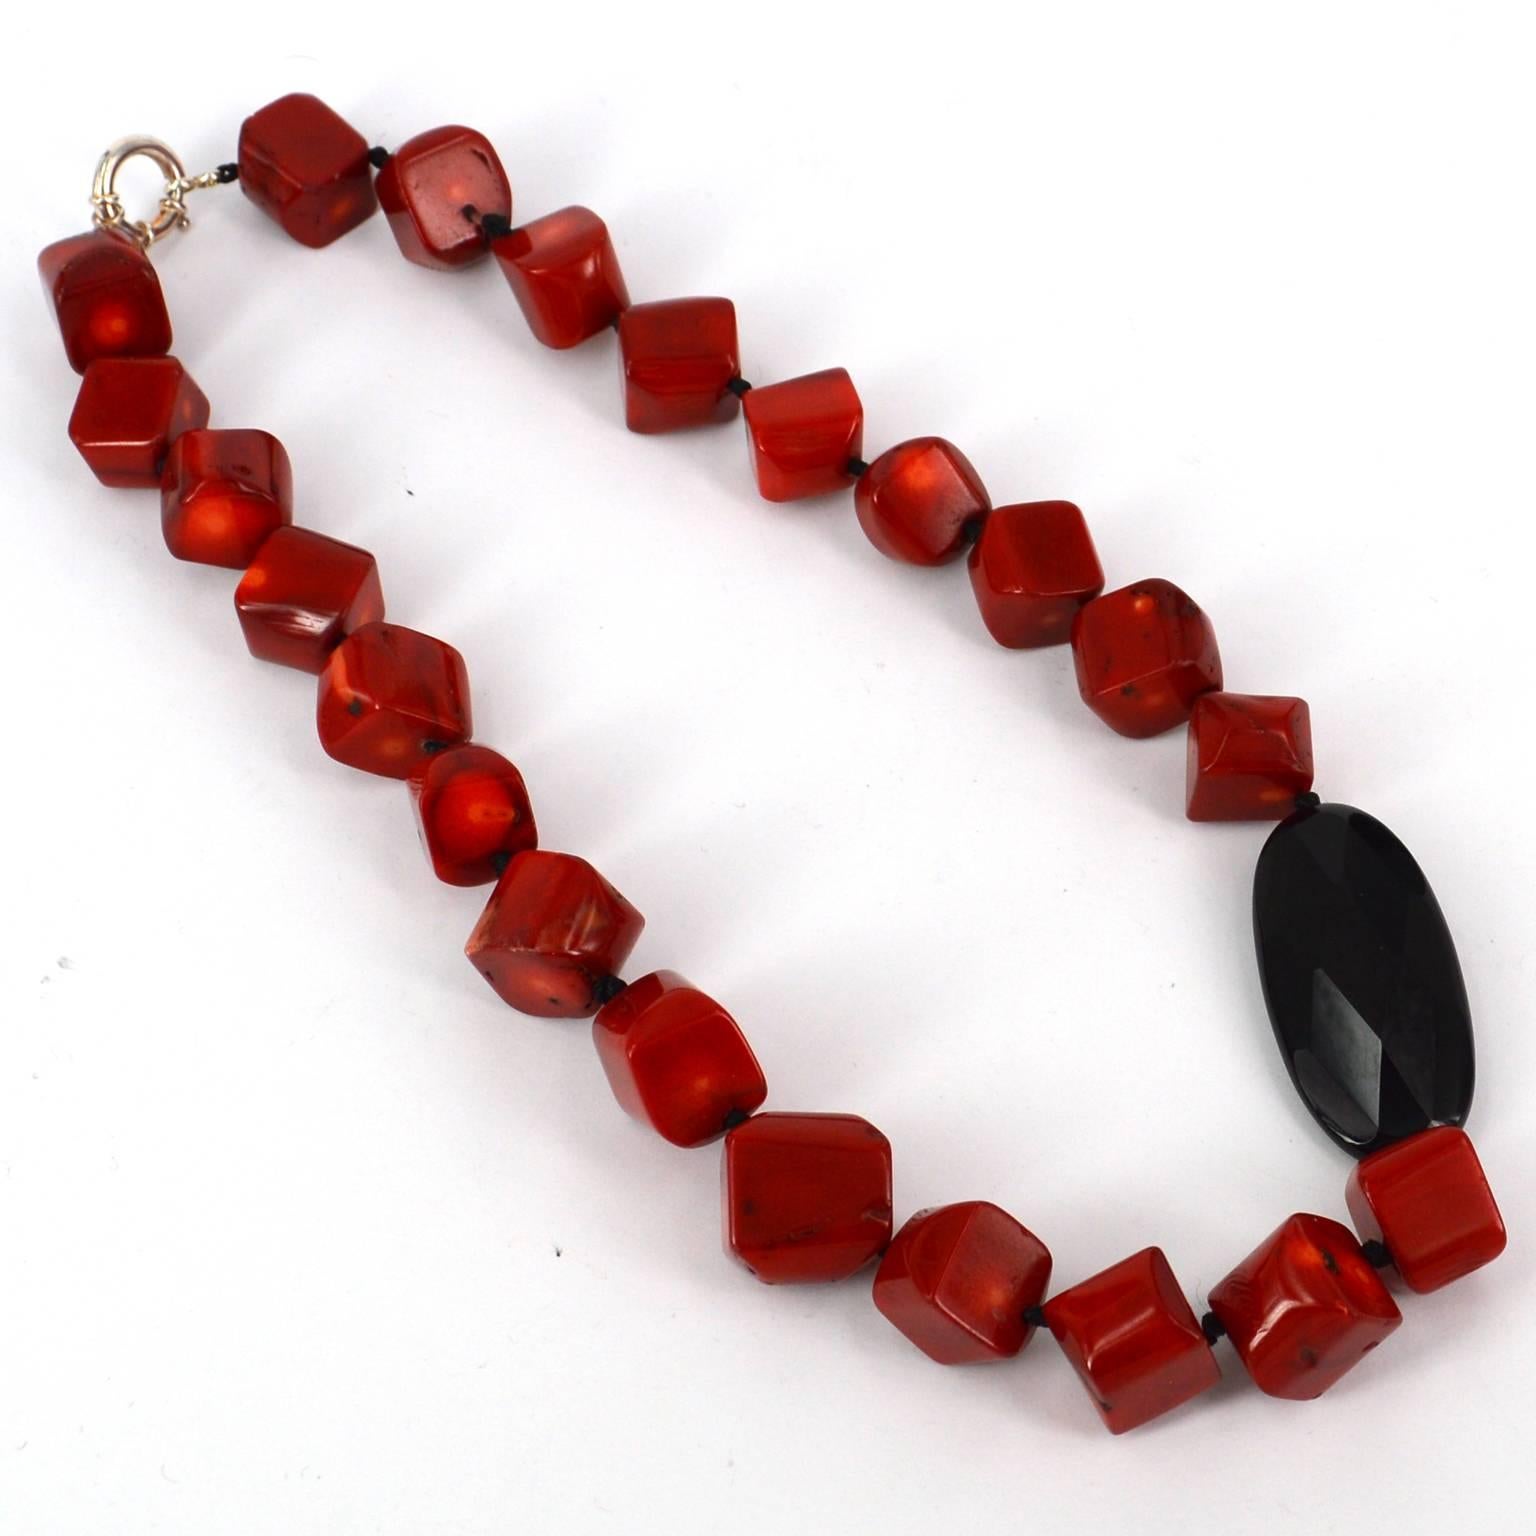 Large side Drilled irregular cubes of Sea Bamboo coral approx 18mm square with large Black knots and further accented with a large side set faceted flat oval onyx bead 50x25mm and Sterling Silver 16mm round bolt clasp.
Finished necklace measures 54cm